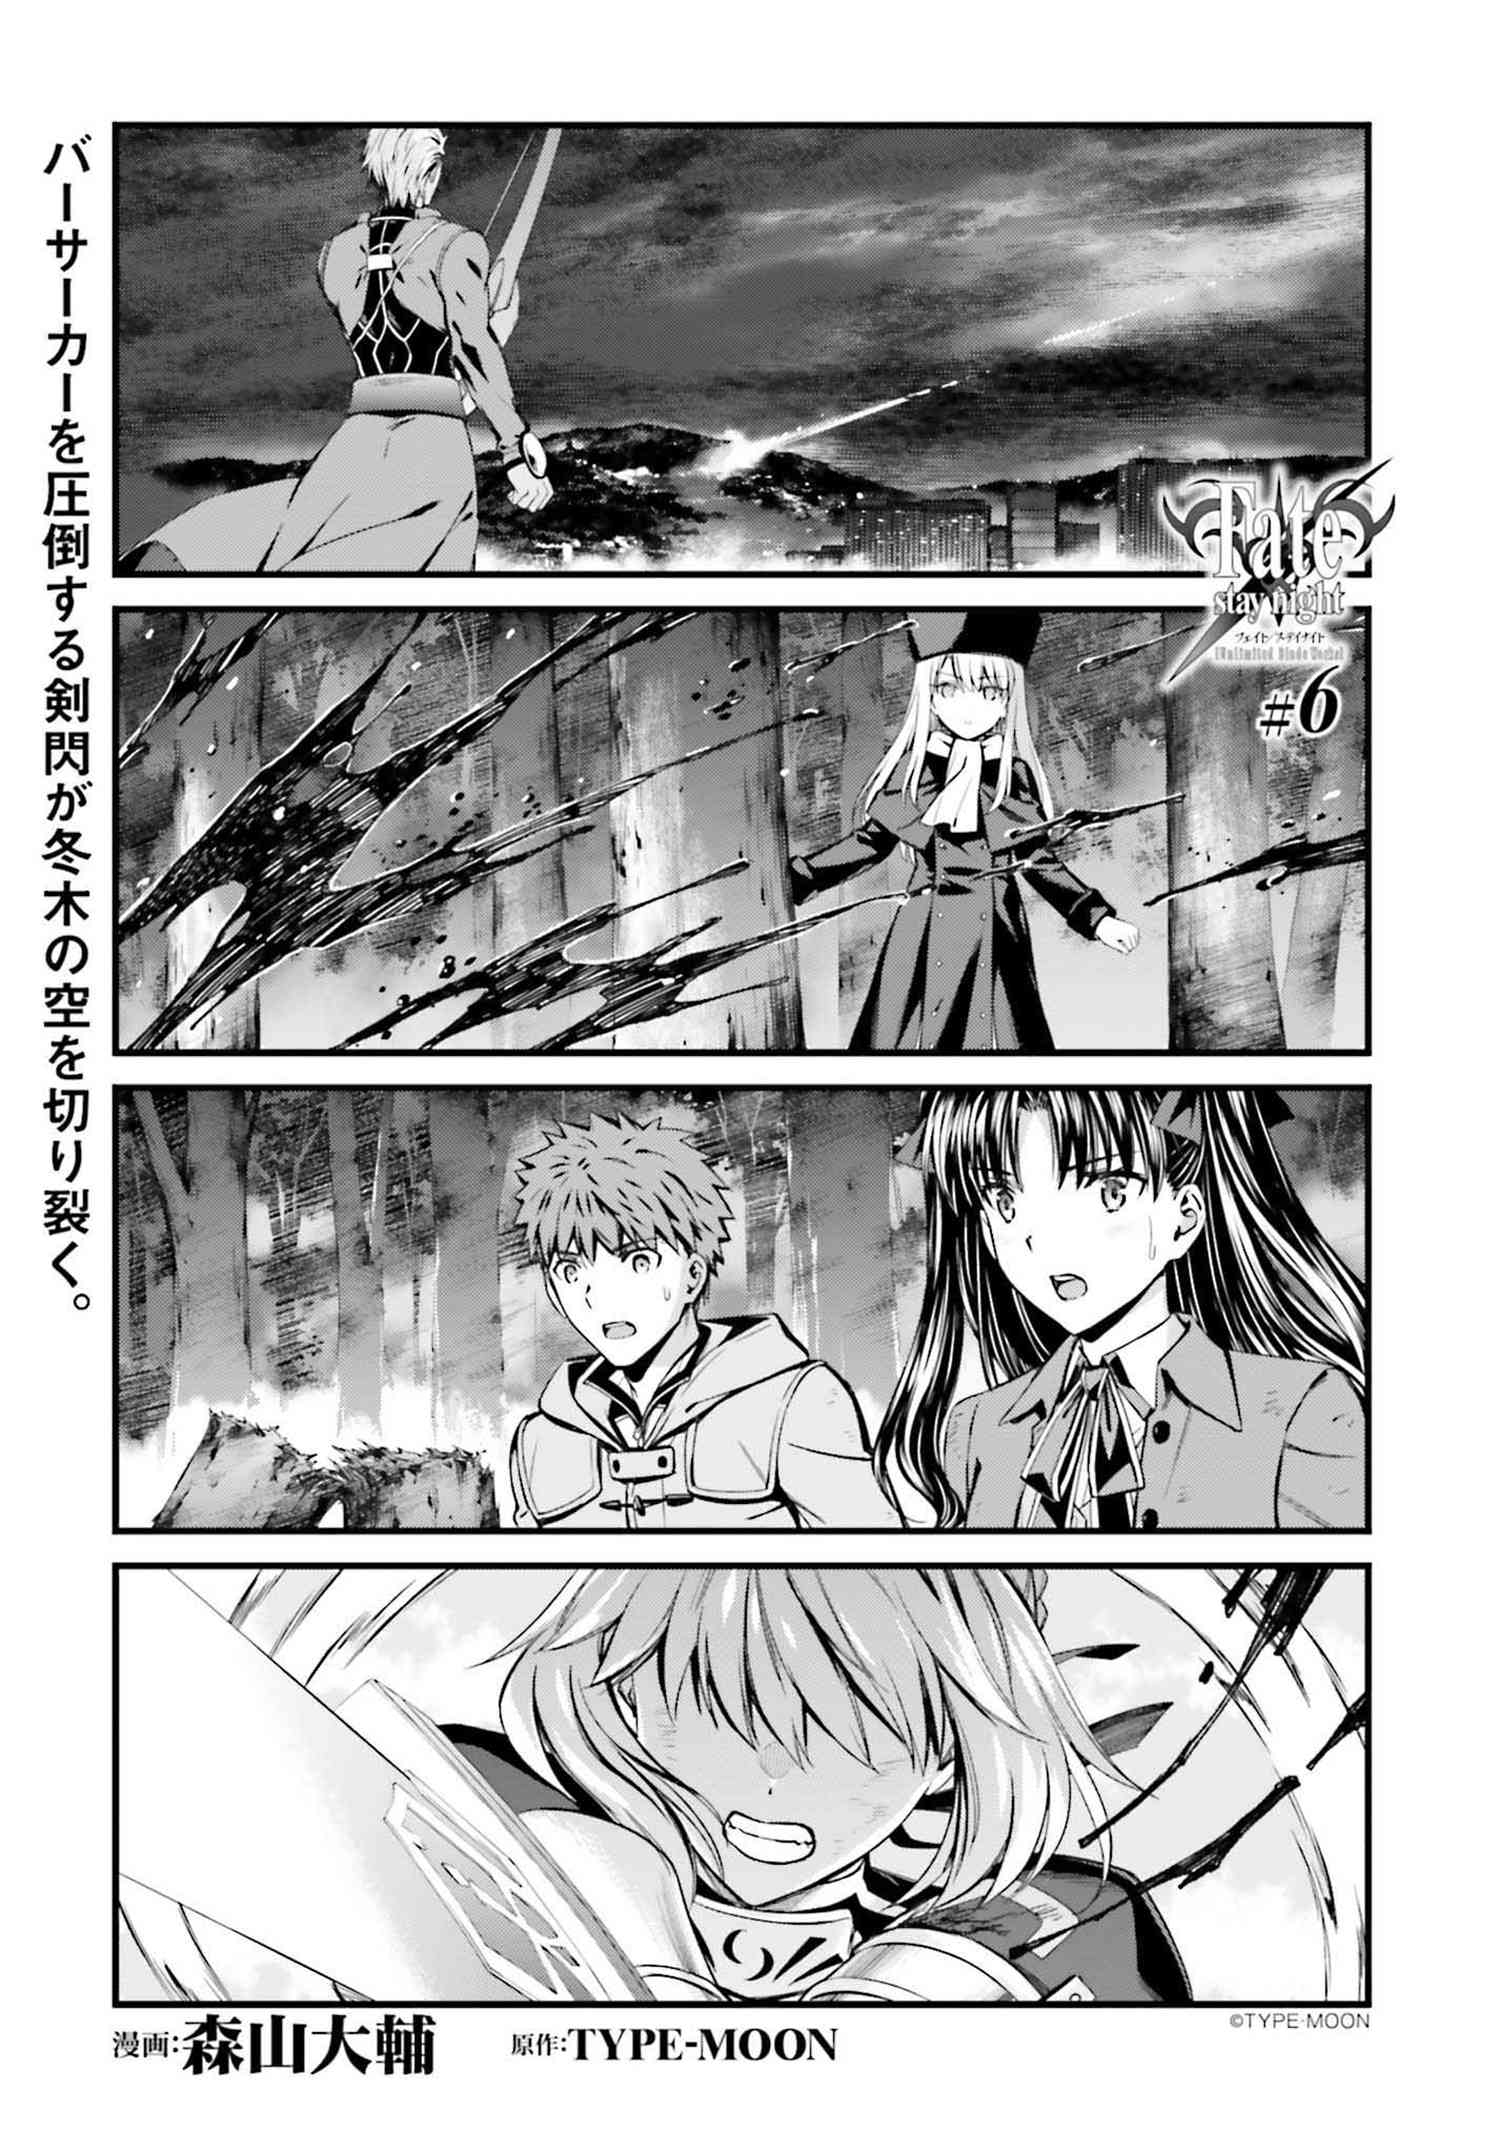 Fate Stay Night Unlimited Blade Works 6 1 Type Moonコミックエース 無料で漫画が読めるオンラインマガジン